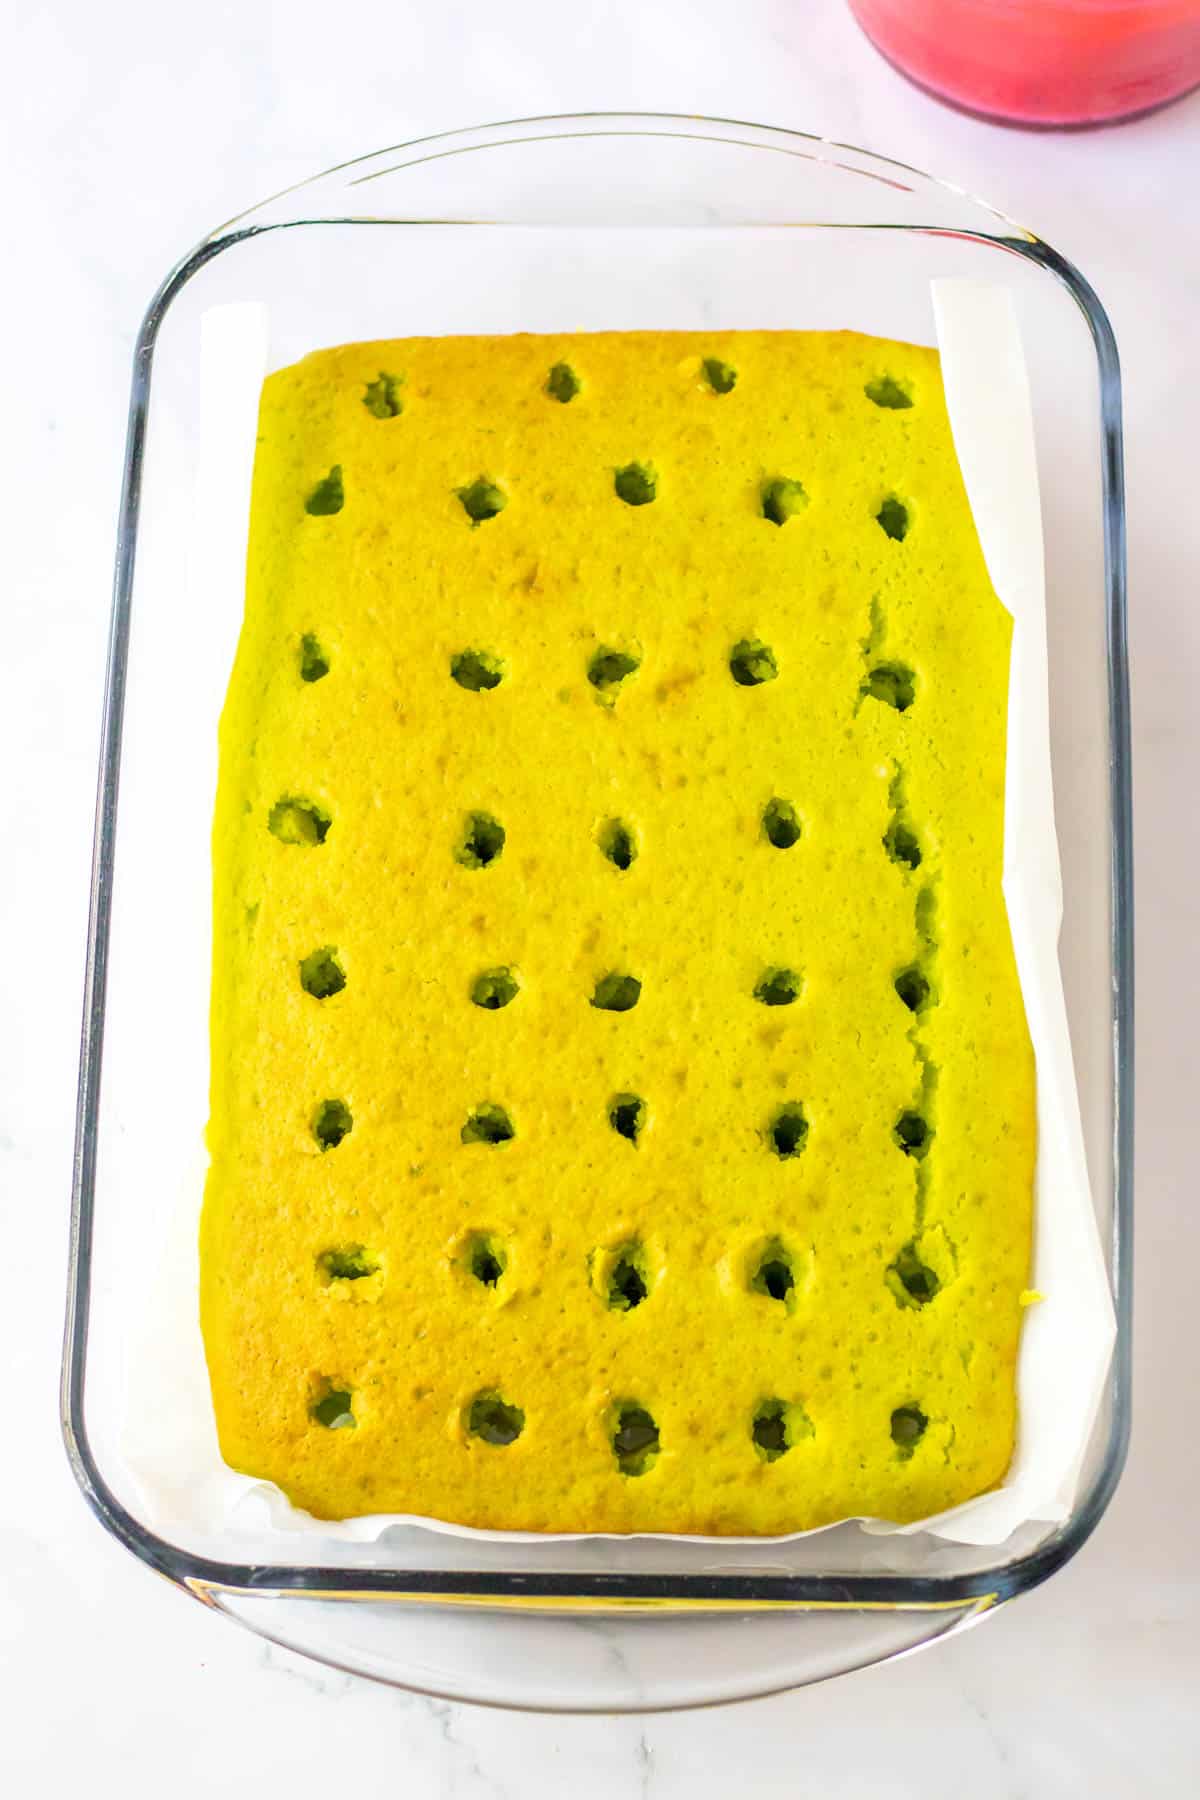 A glass baking dish with a yellow cake in it with holes in the top.